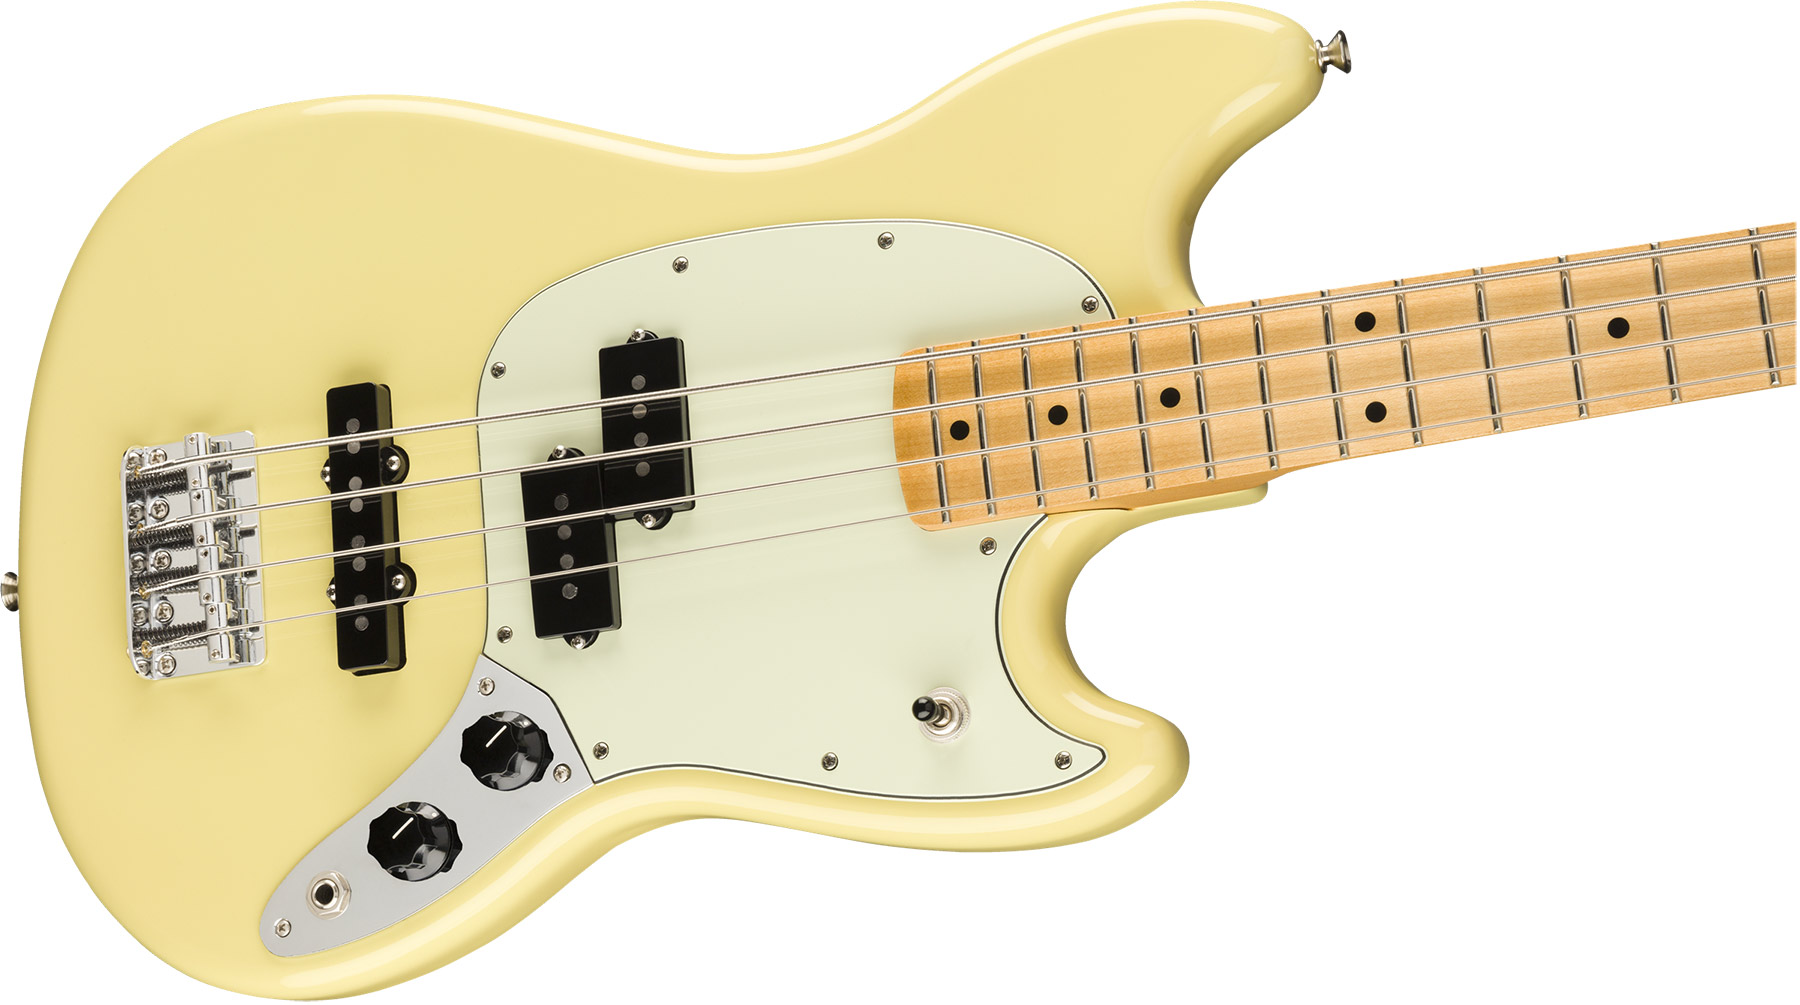 Fender Player Mustang Bass Pj Ltd Mex Mn - Canary - Basse Électrique Solid Body - Variation 2